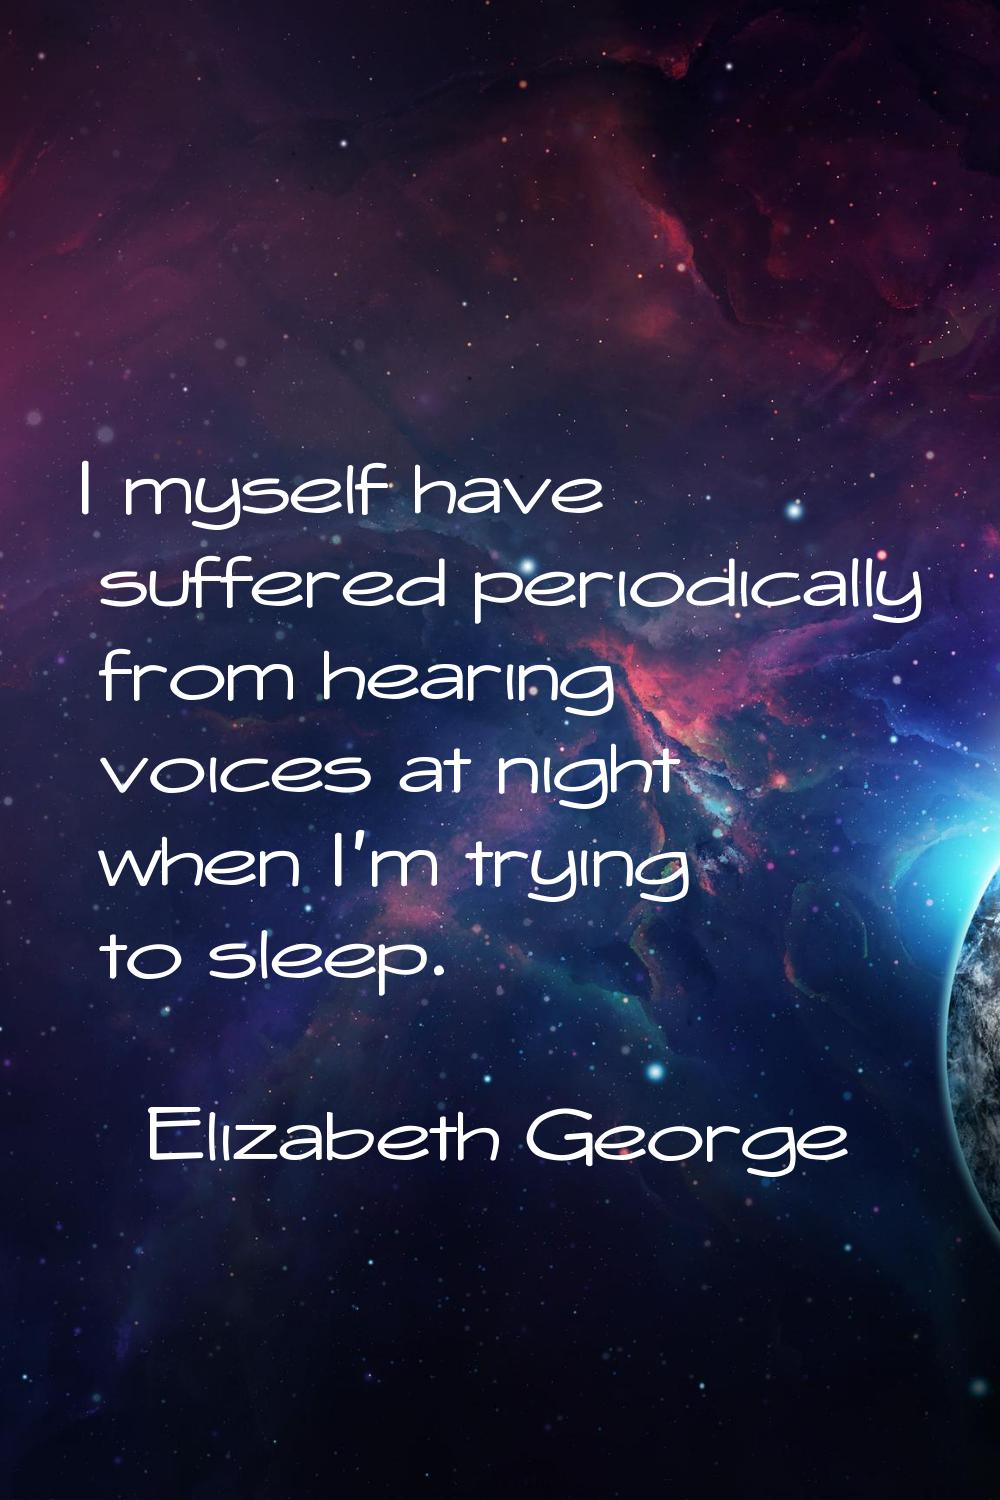 I myself have suffered periodically from hearing voices at night when I'm trying to sleep.